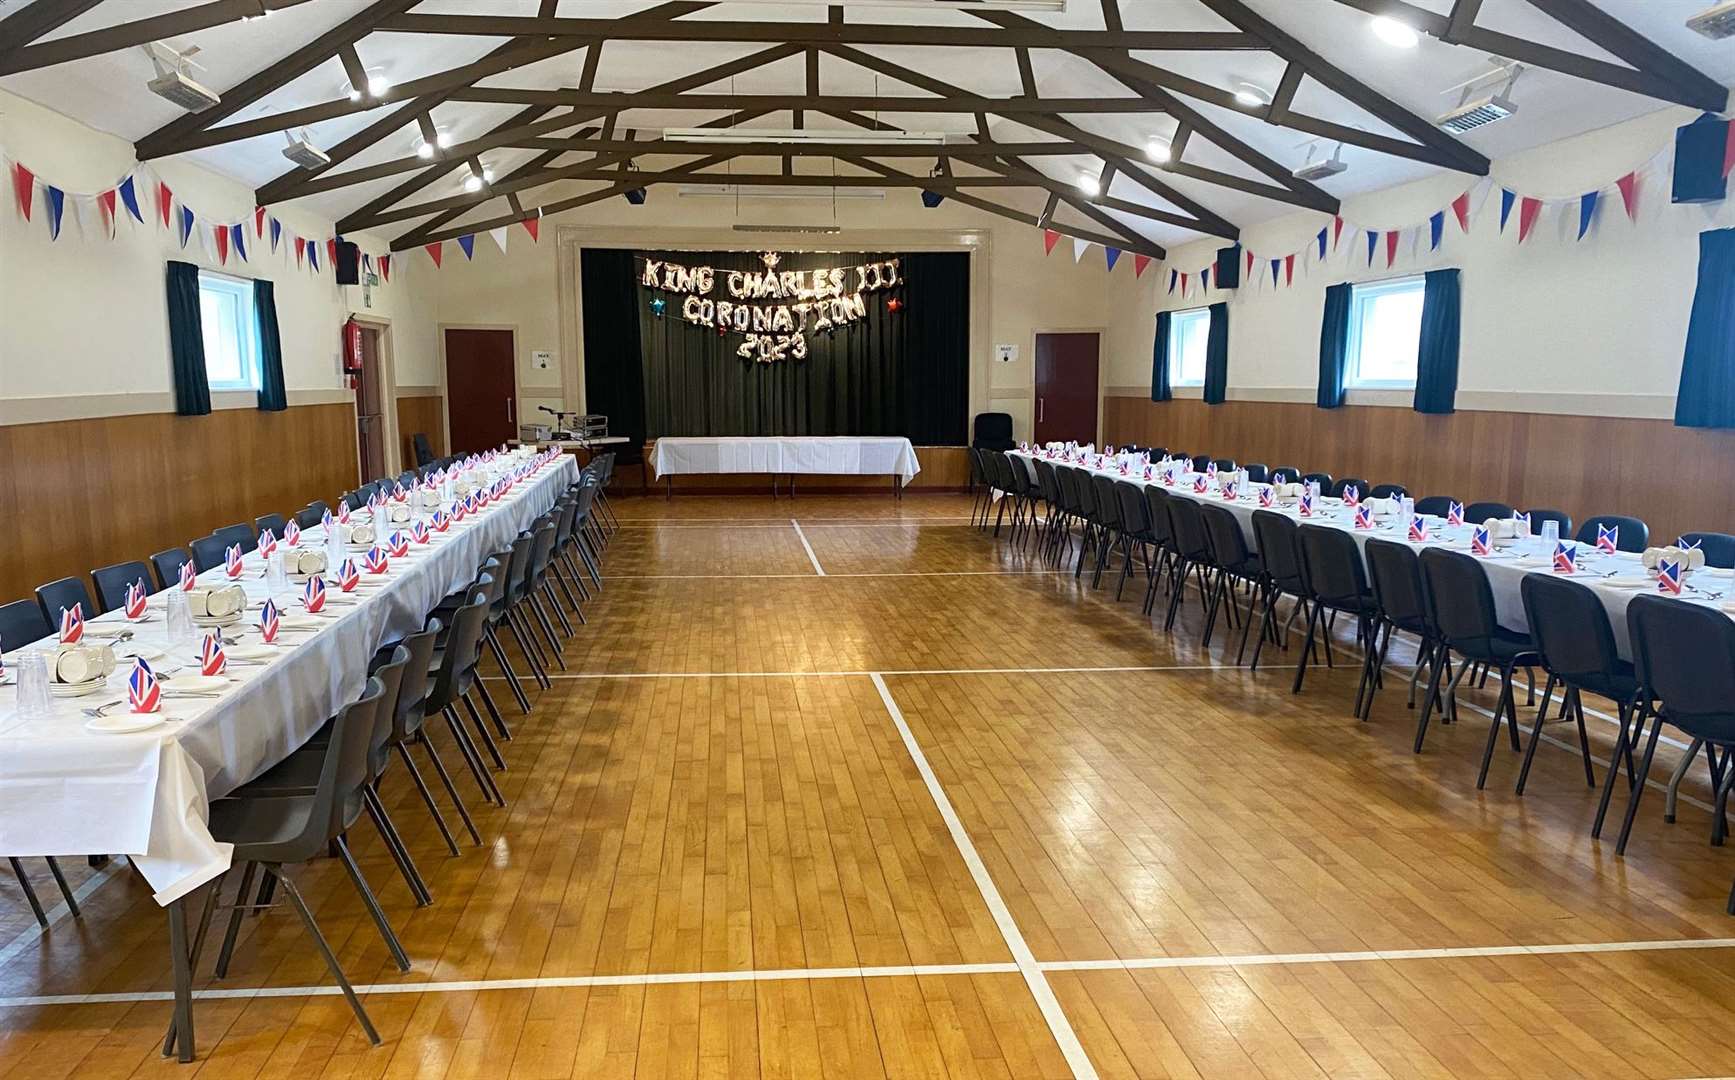 Dunbeath Community Centre laid out for the King's lunch.